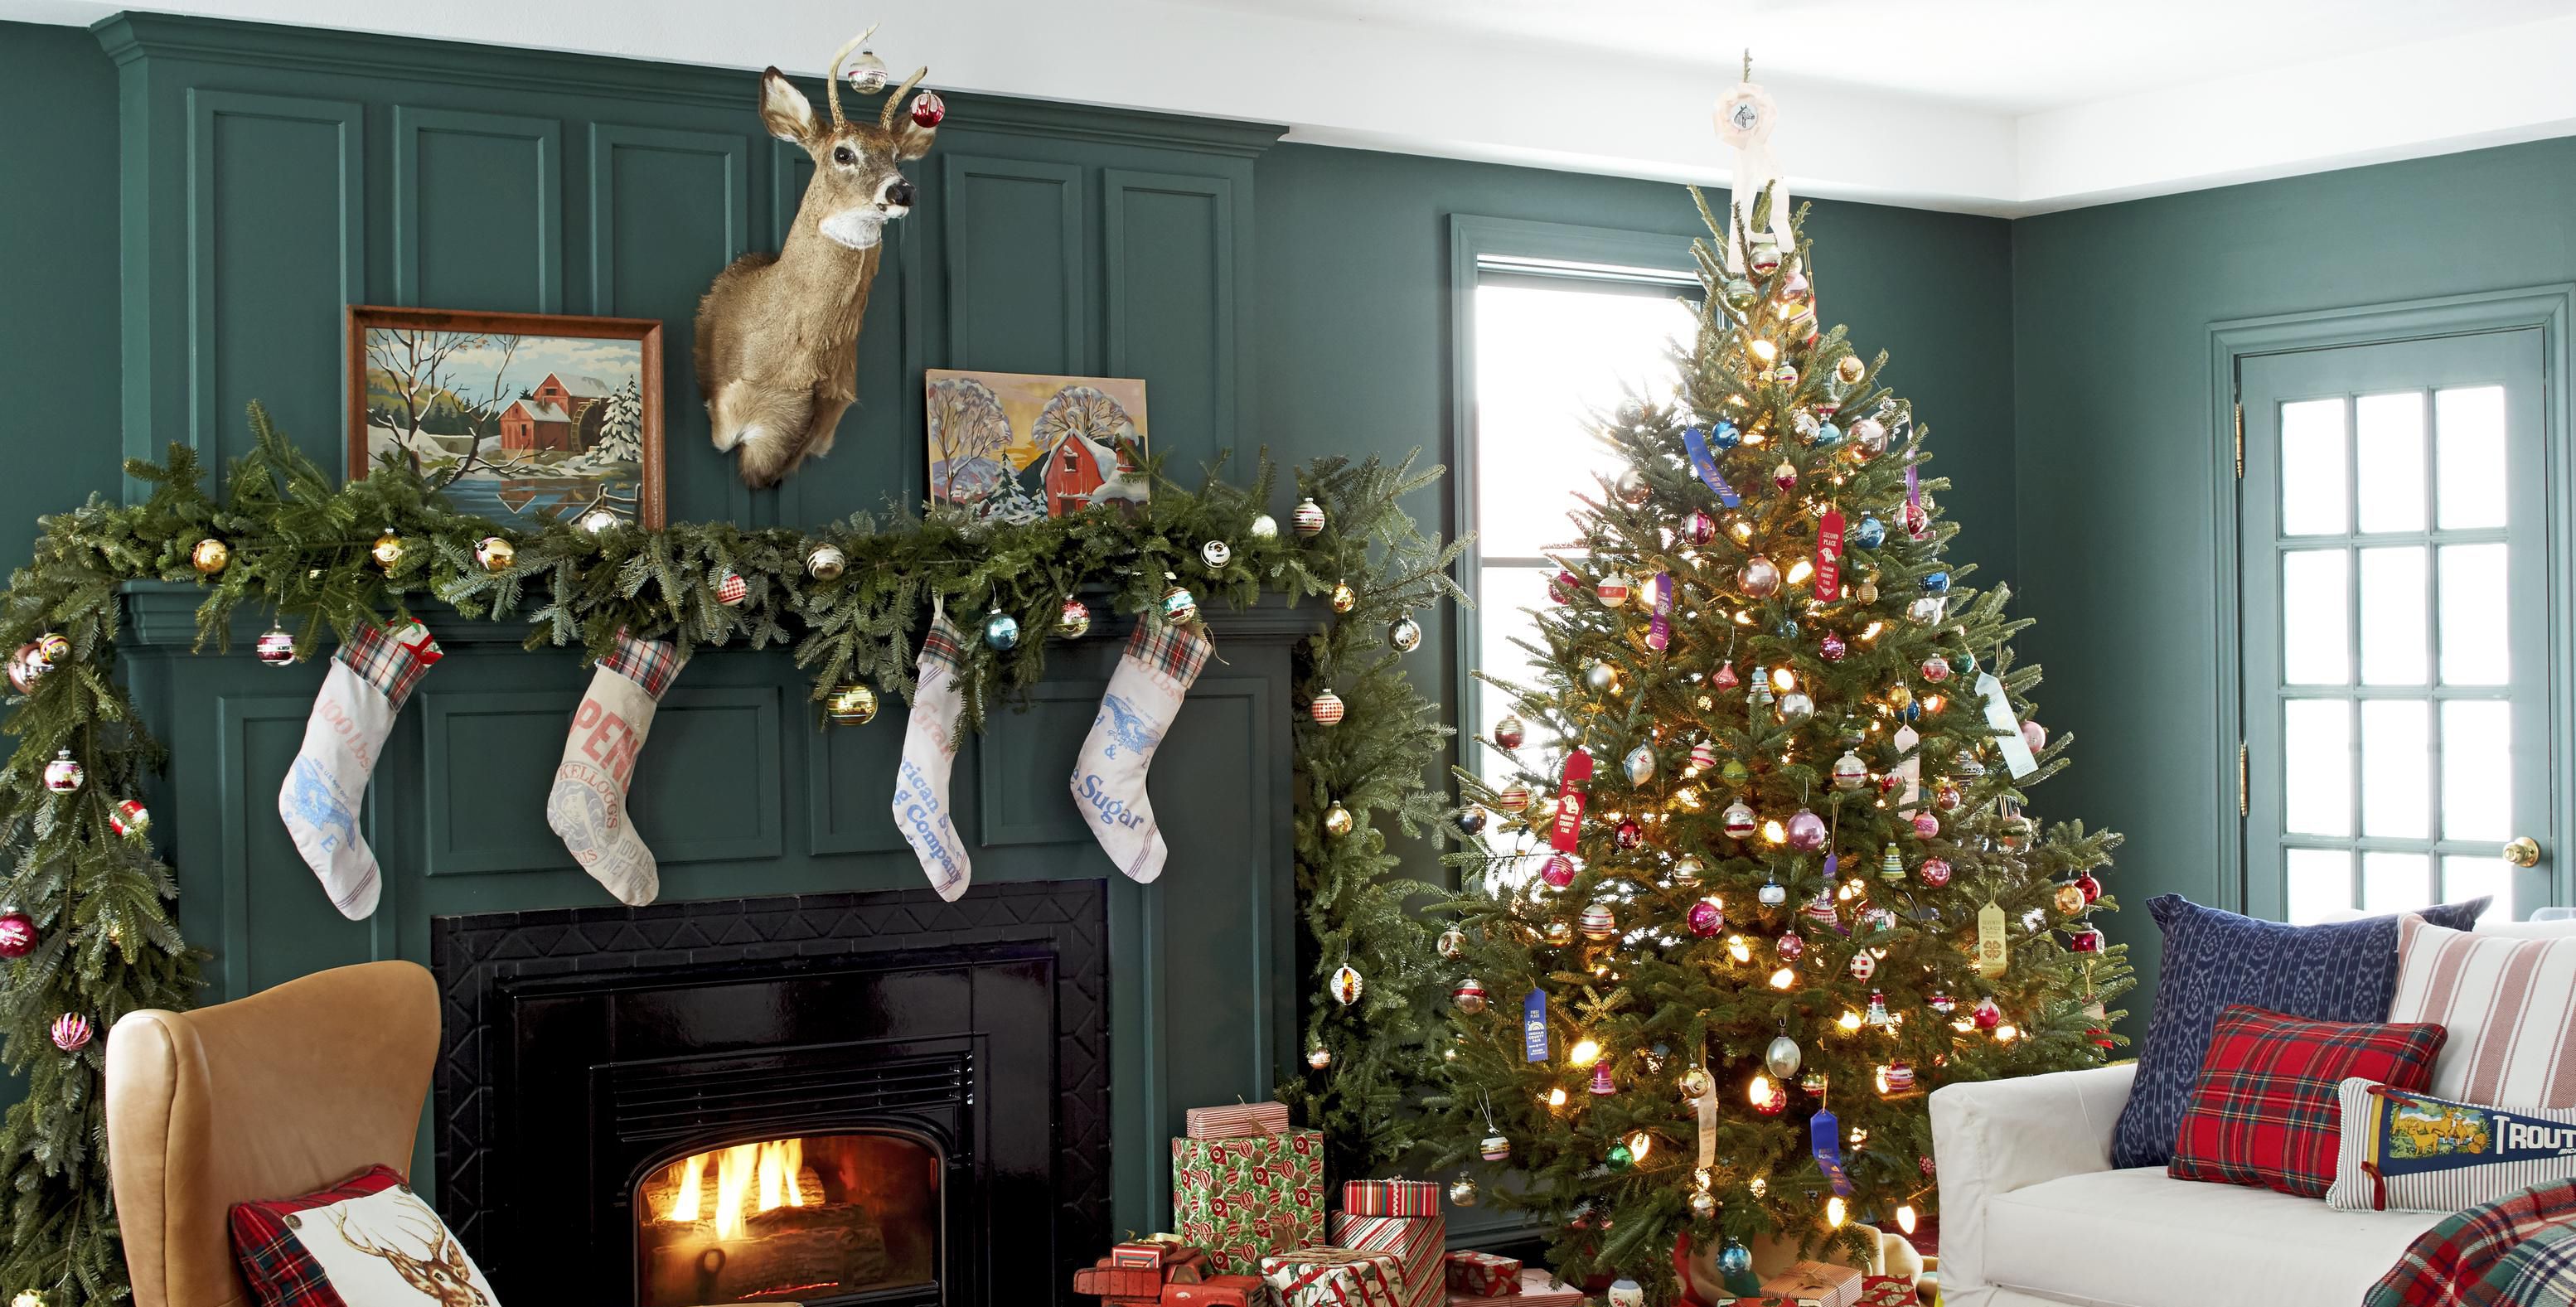 25　Living　Christmas　Decorate　Room　Room　a　Decorating　Ideas　How　to　Living　for　Christmas